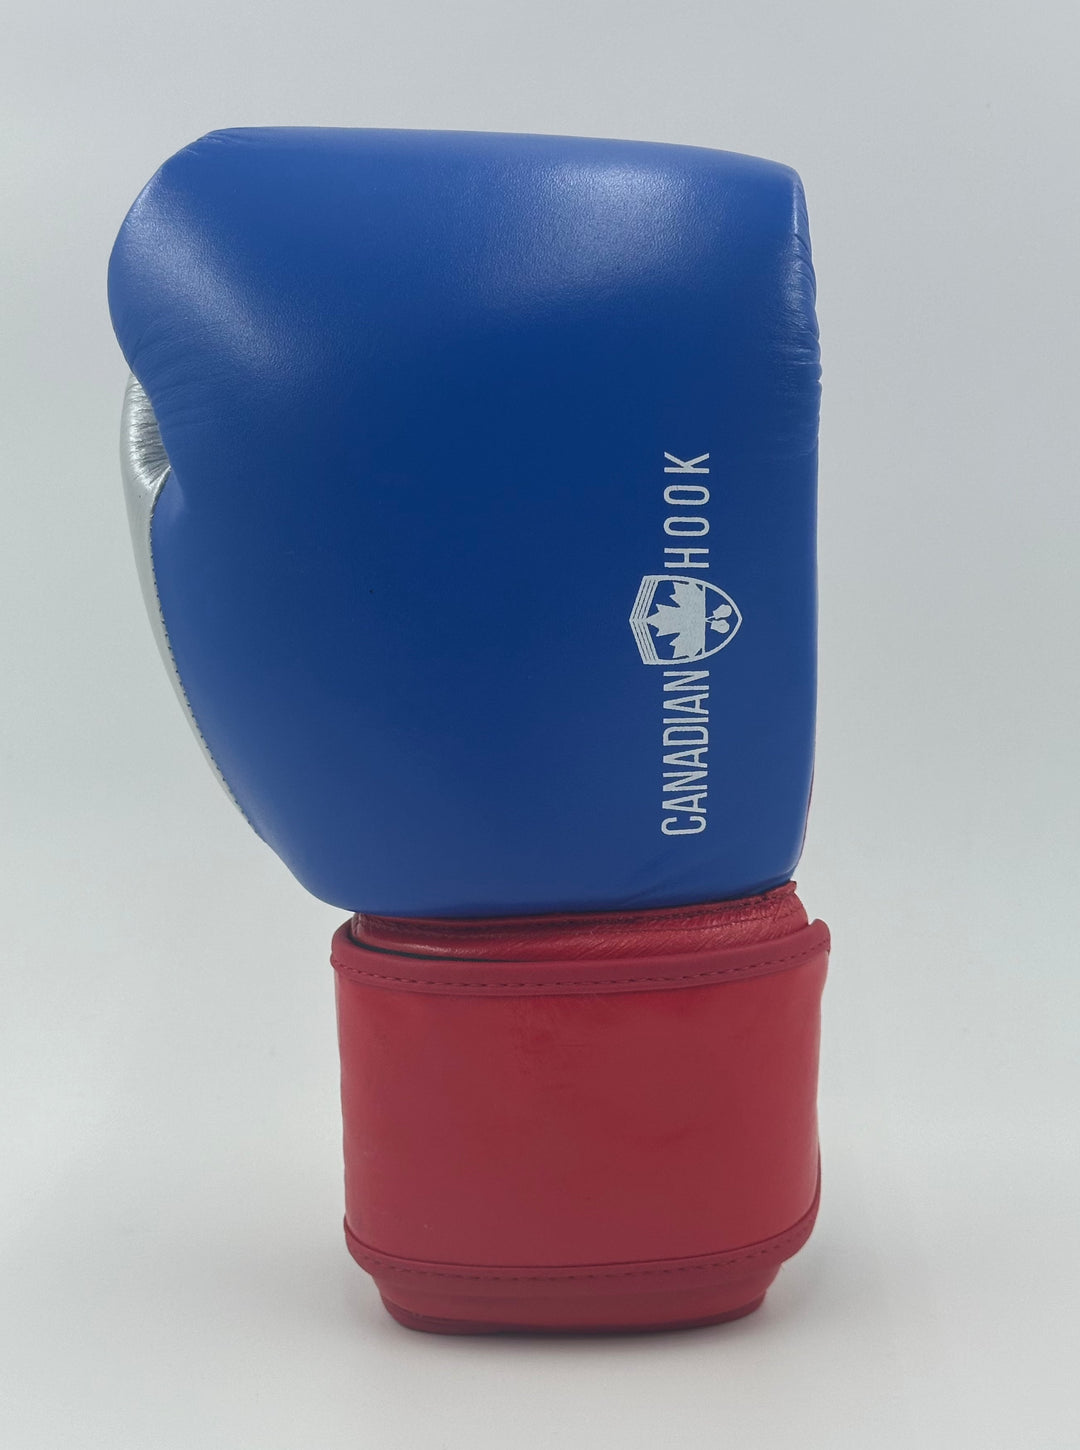 G8000 BOXING GLOVES - RED/BLUE/GRAY – Canadian Hook